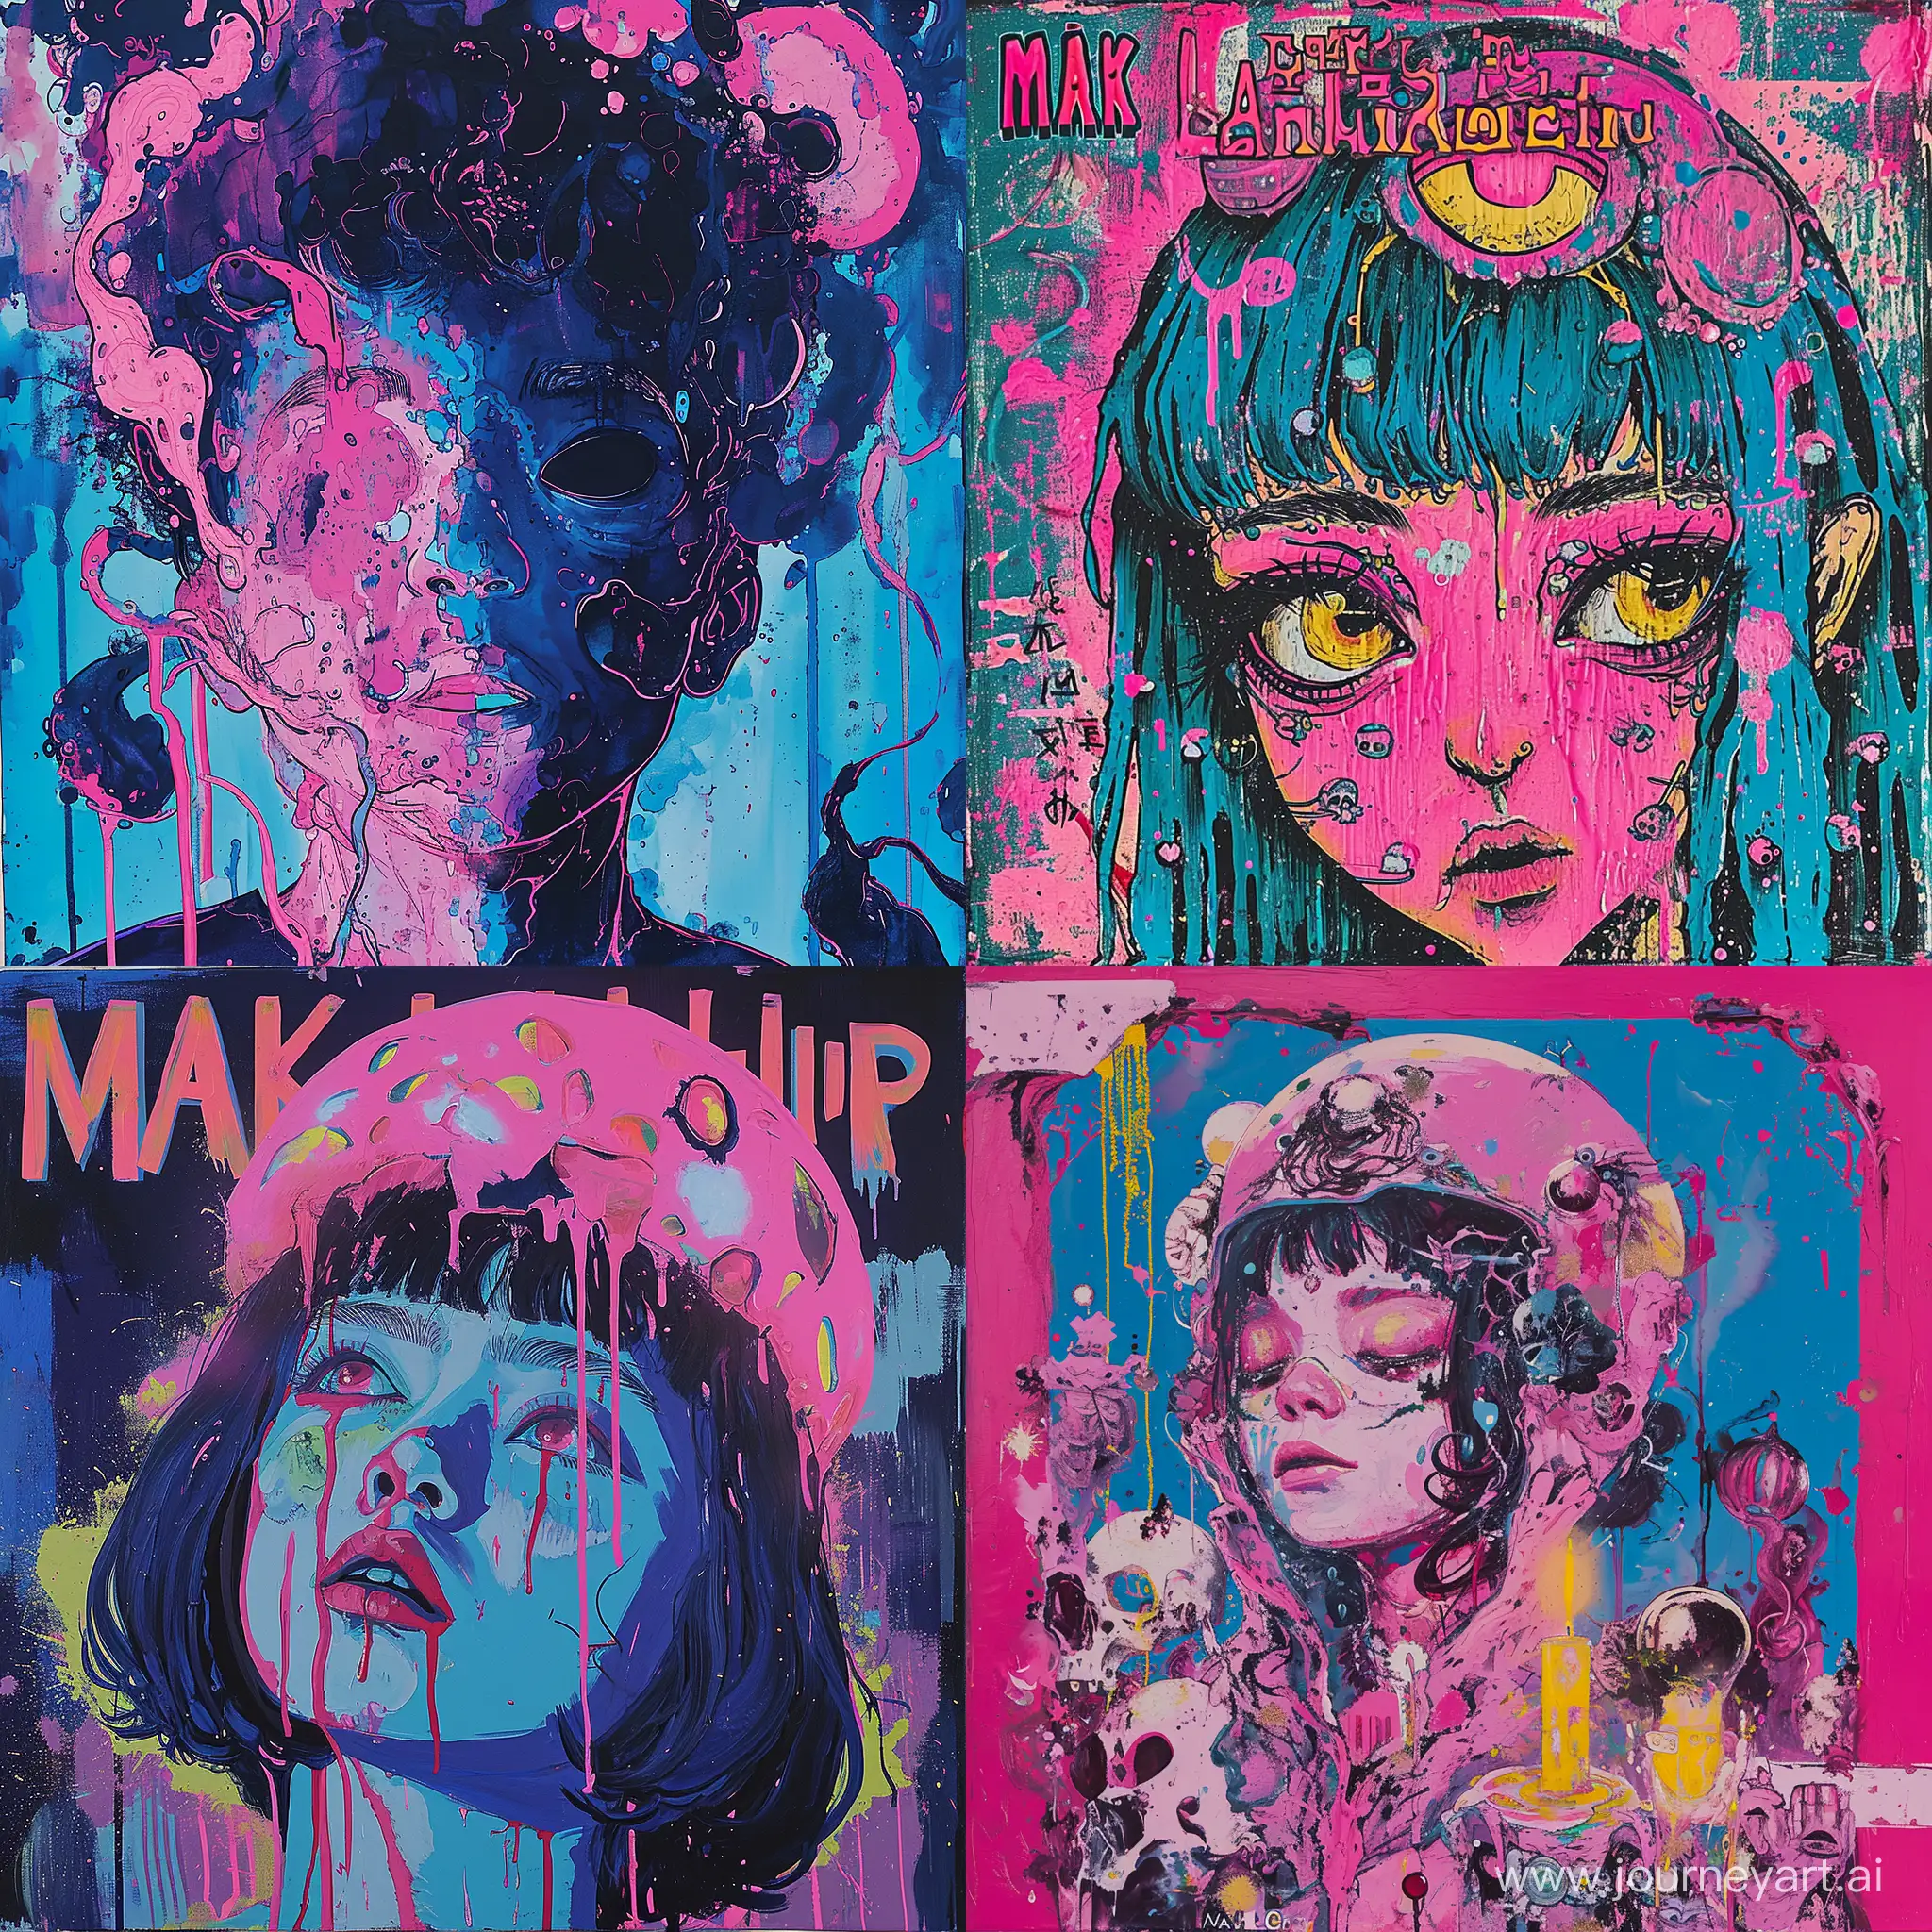 MAK LAMPIR by the cover of the album, in the style of dark azure and pink, psychedelic manga, 'catch a dead zombie, genderless, i can't believe how beautiful this is, conceptual art pieces, thick paint, celestialpunk